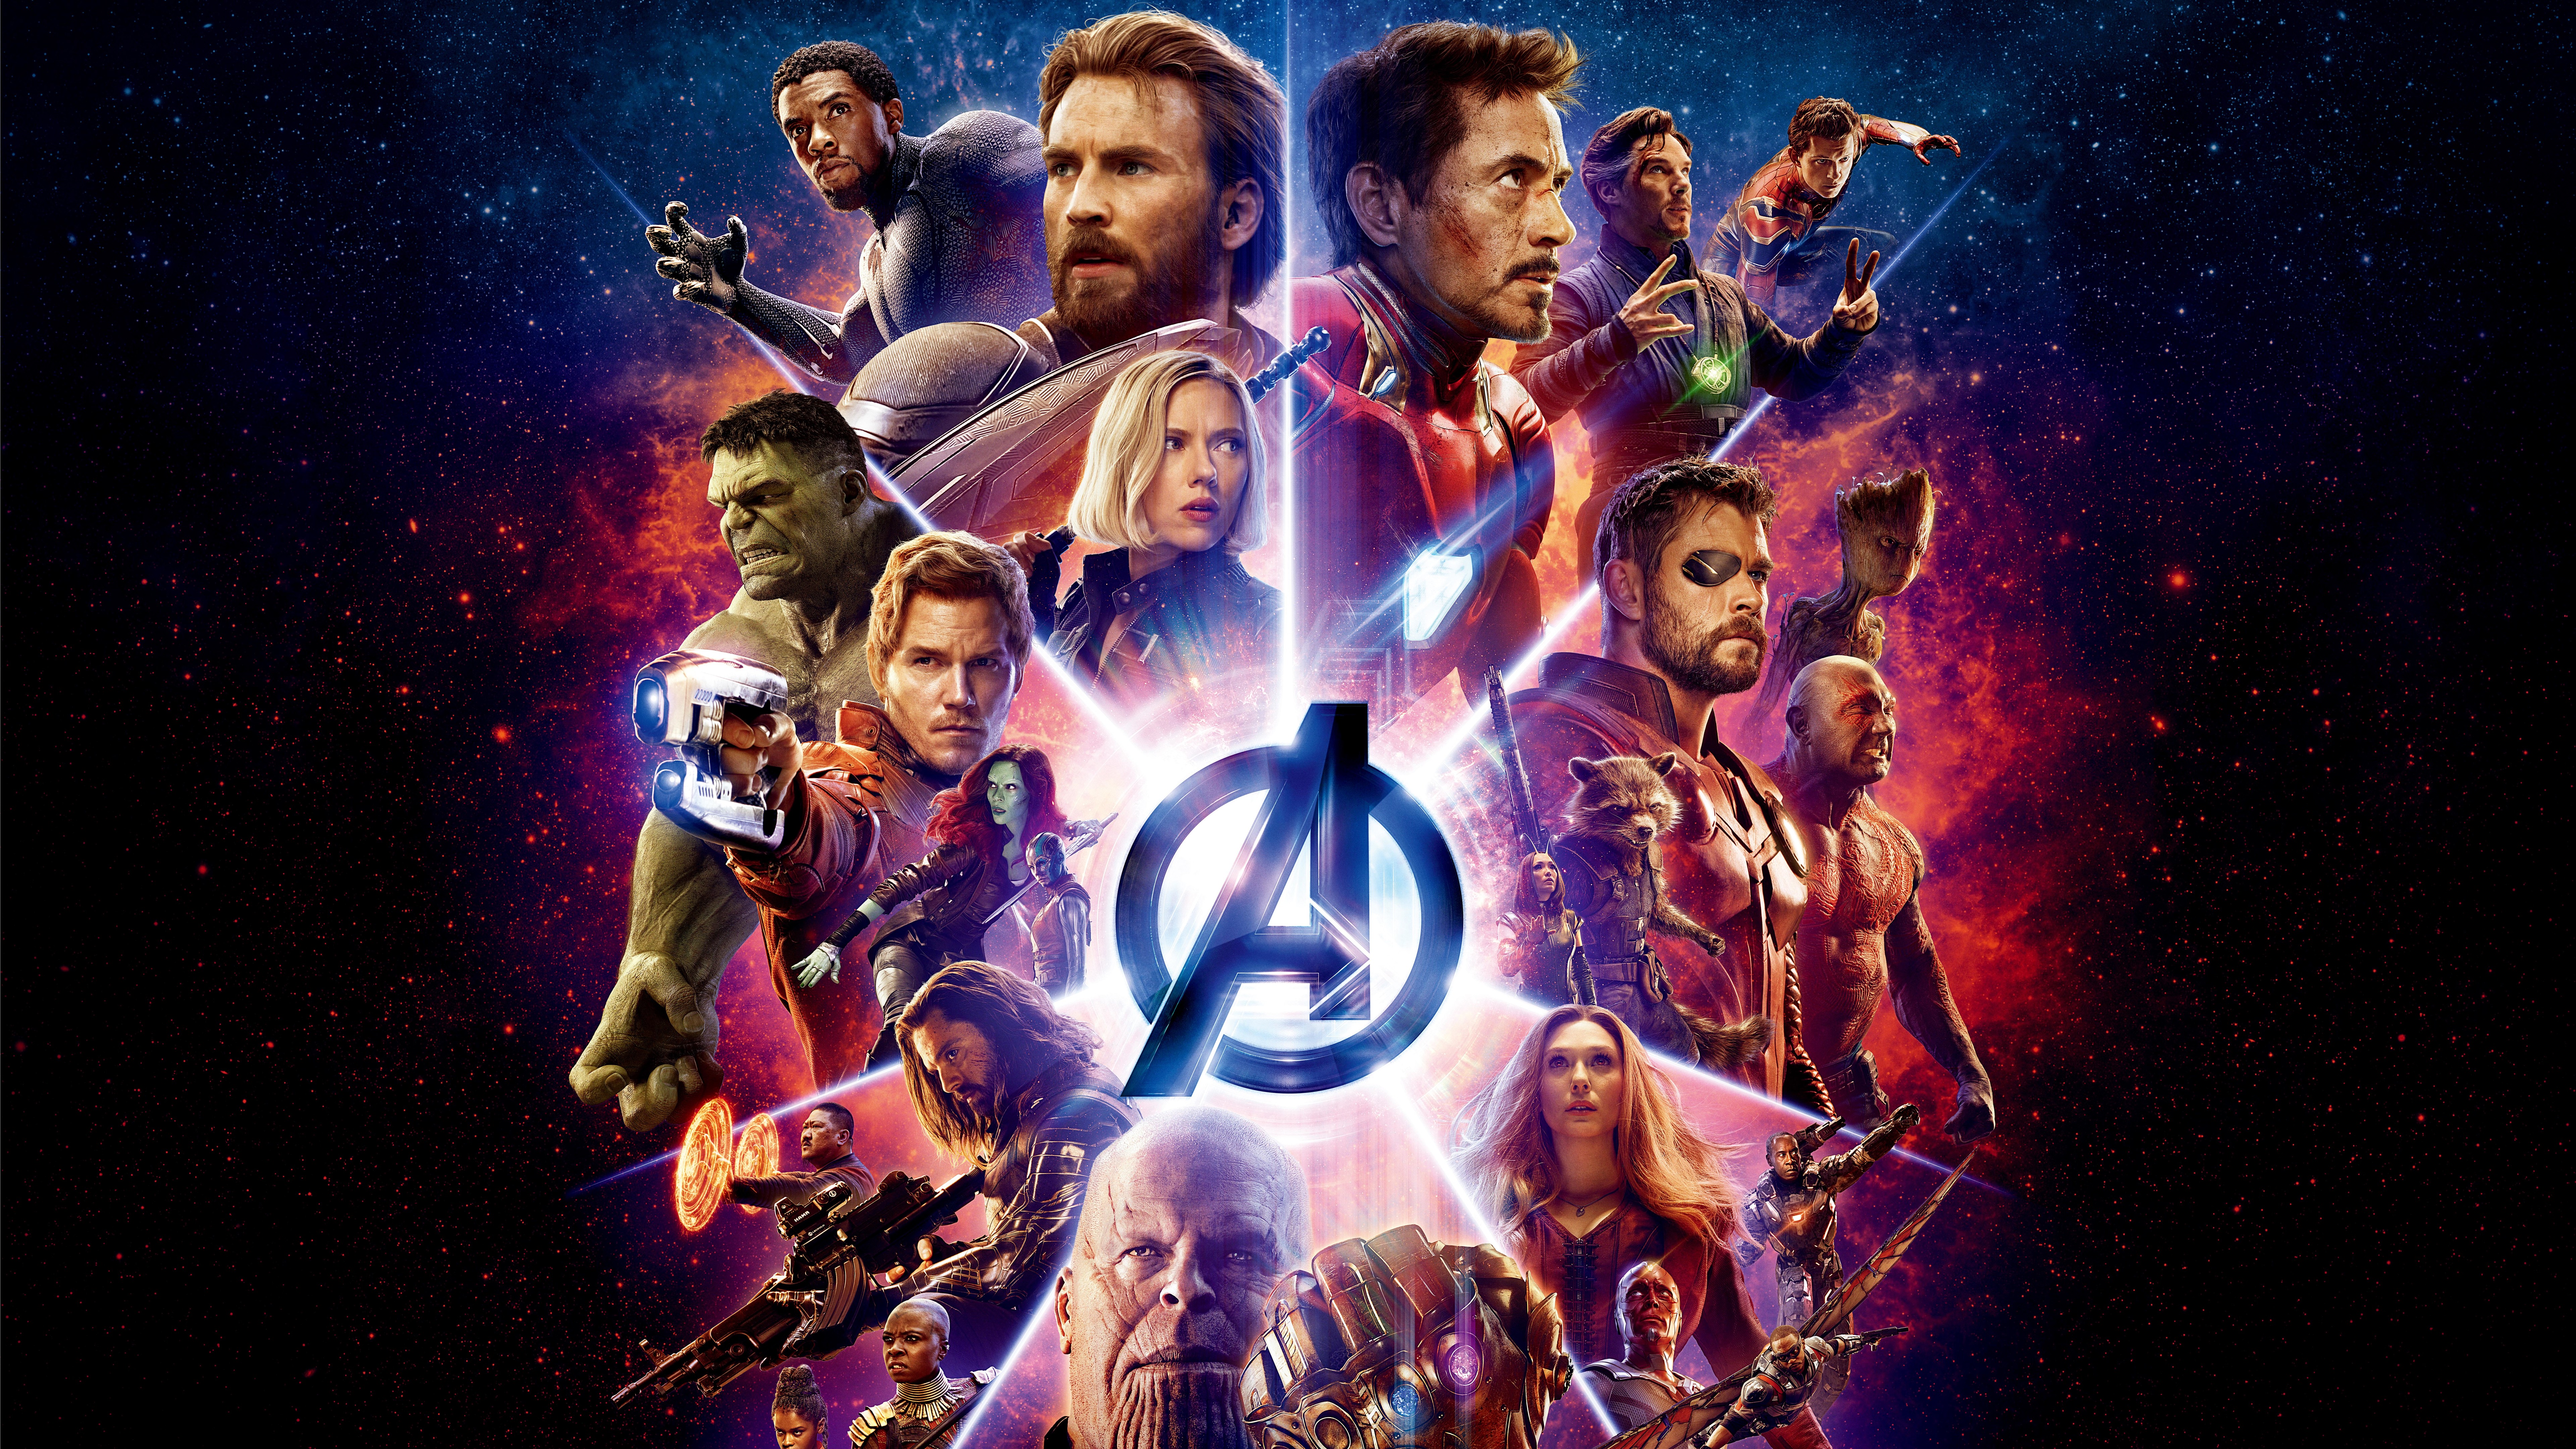 avengers wallpaper for pc,musical,font,graphic design,poster,event